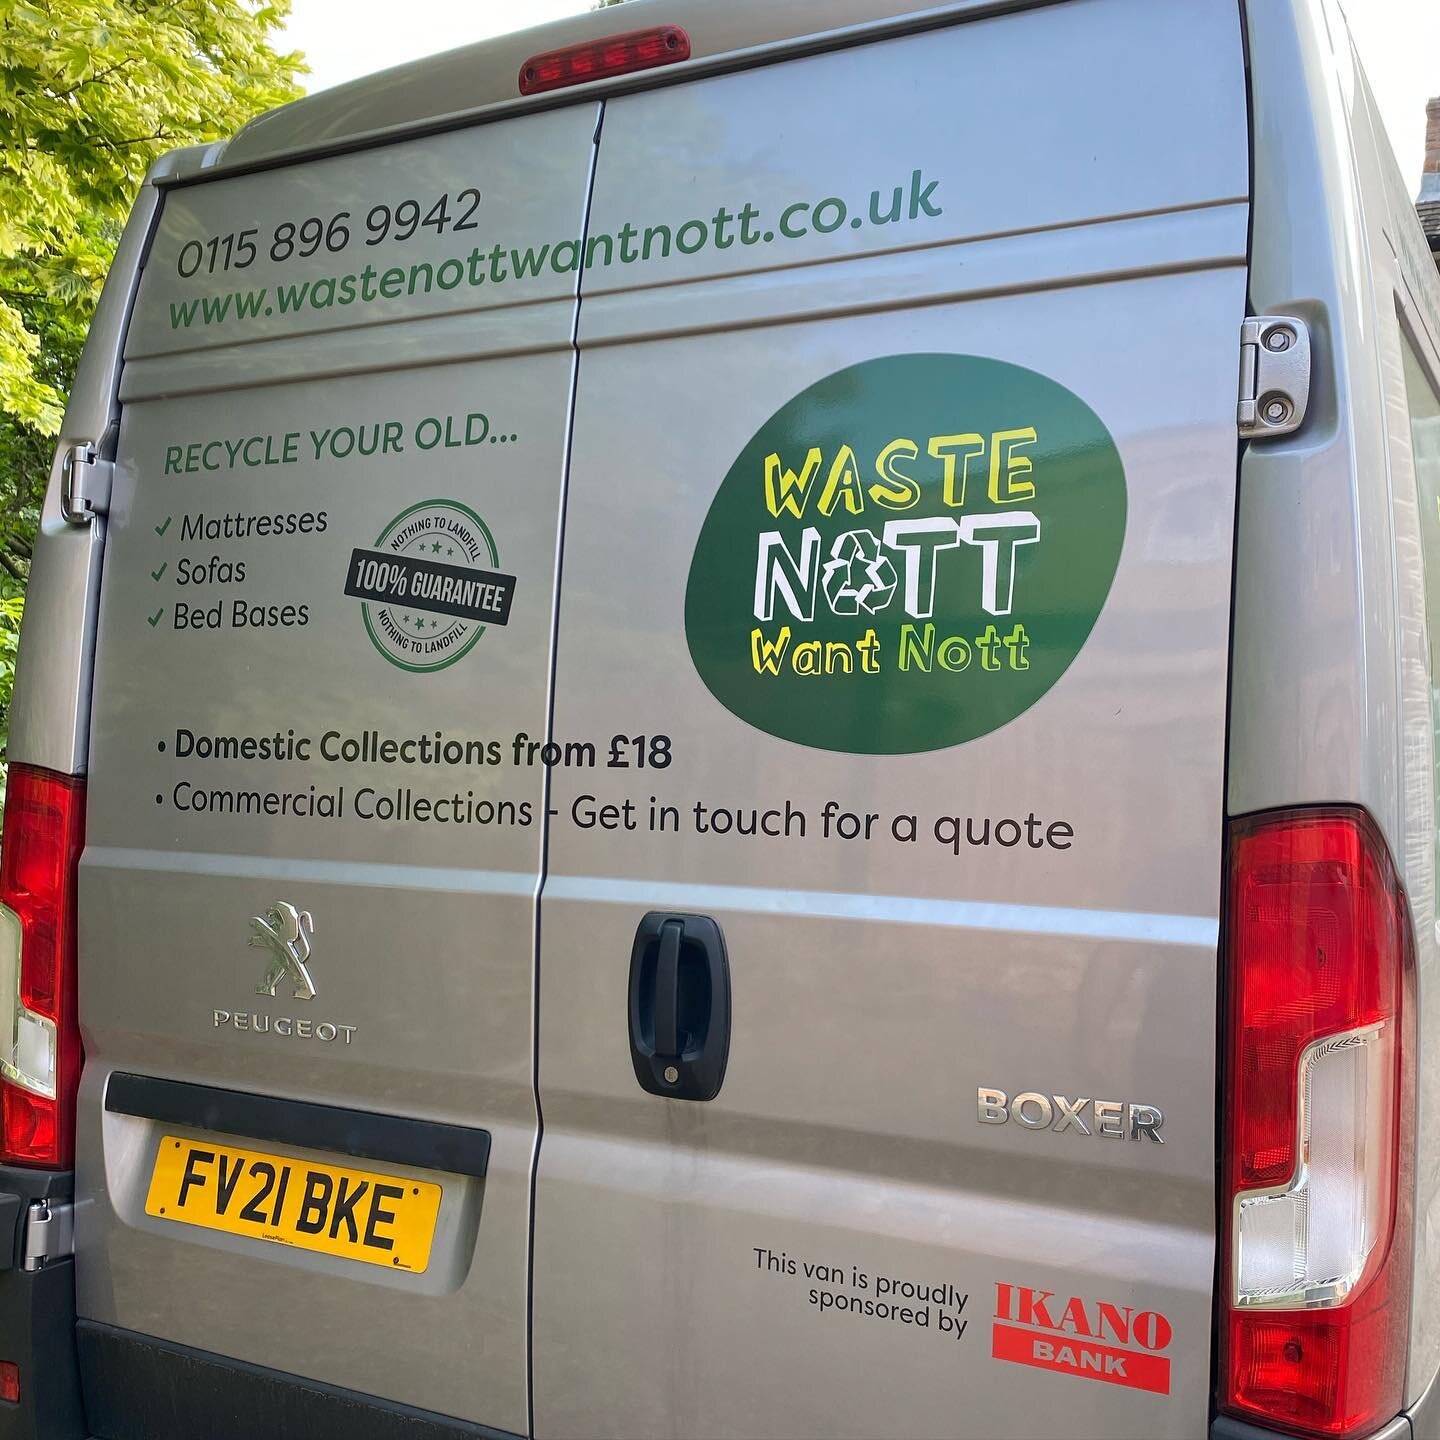 A big shout out to @lifeatikanobank for sponsoring our lovely van. We&rsquo;ve been putting the miles in and our #driveby advertising is already paying off. 
.
This week has been a ☀️ hot one for moving bulky items 💪🏼 but it&rsquo;s so worth it. 

